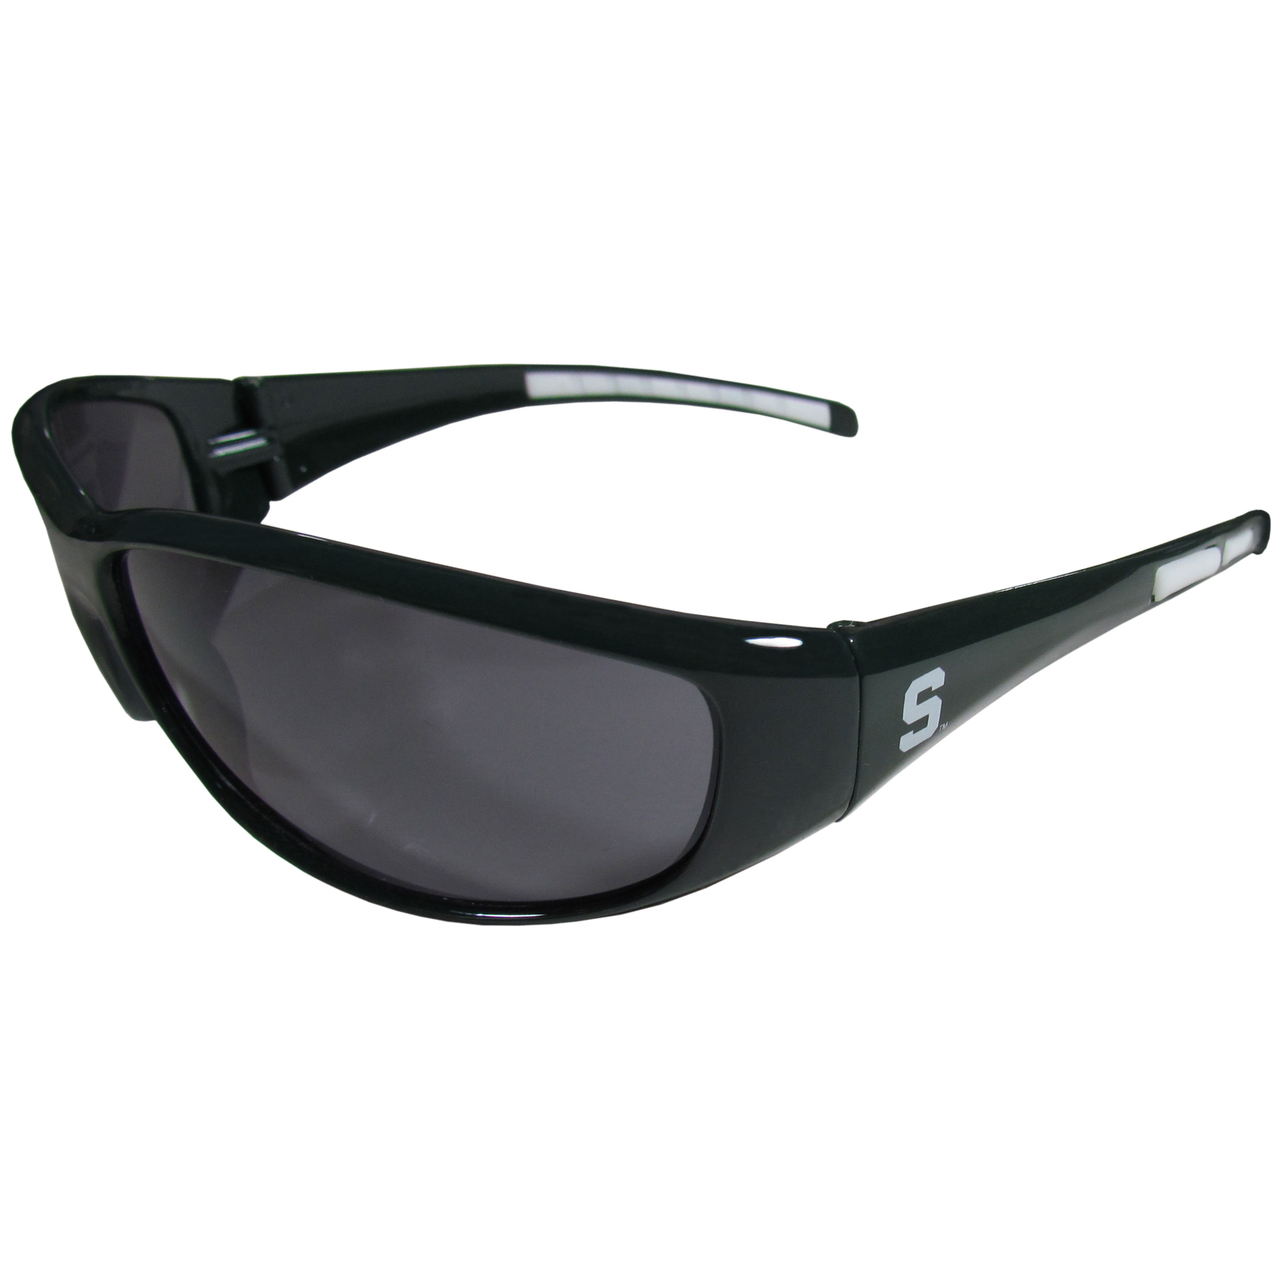 Michigan State Spartans Sunglasses - Wrap - Special Order